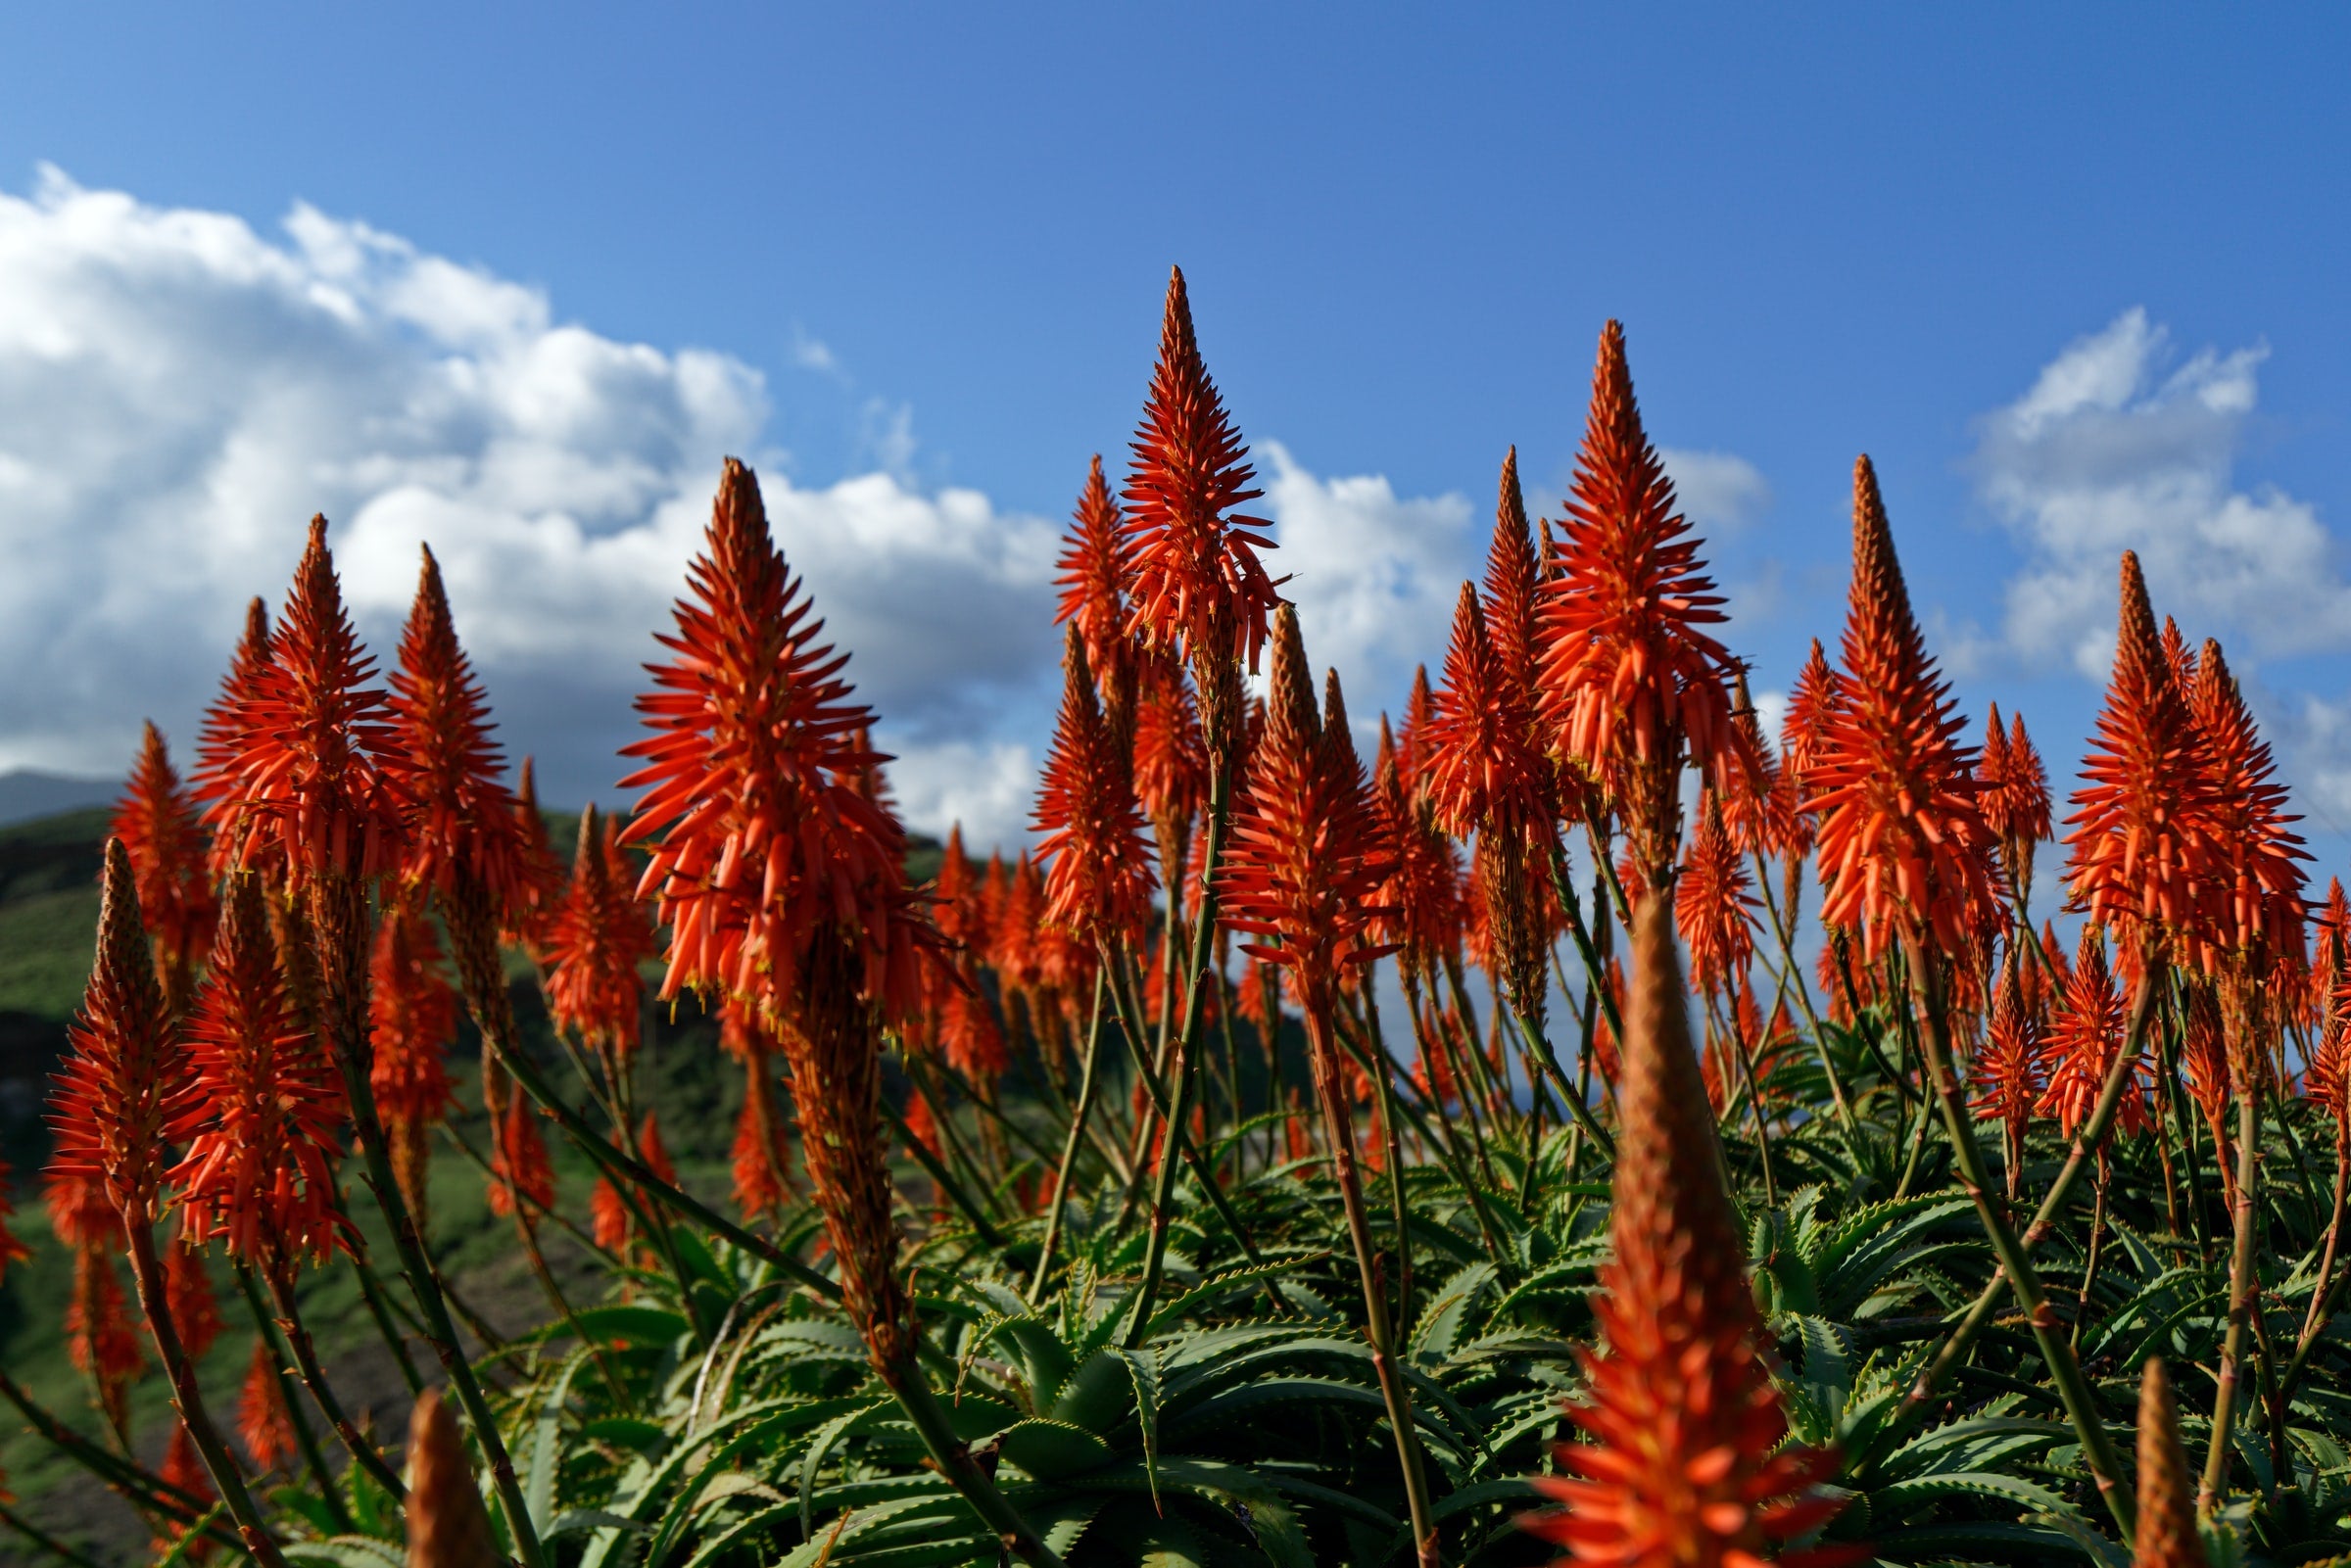 Aloe Vera Flowers. Aloe Vera Gel has many benefits for your skin, find out how here.